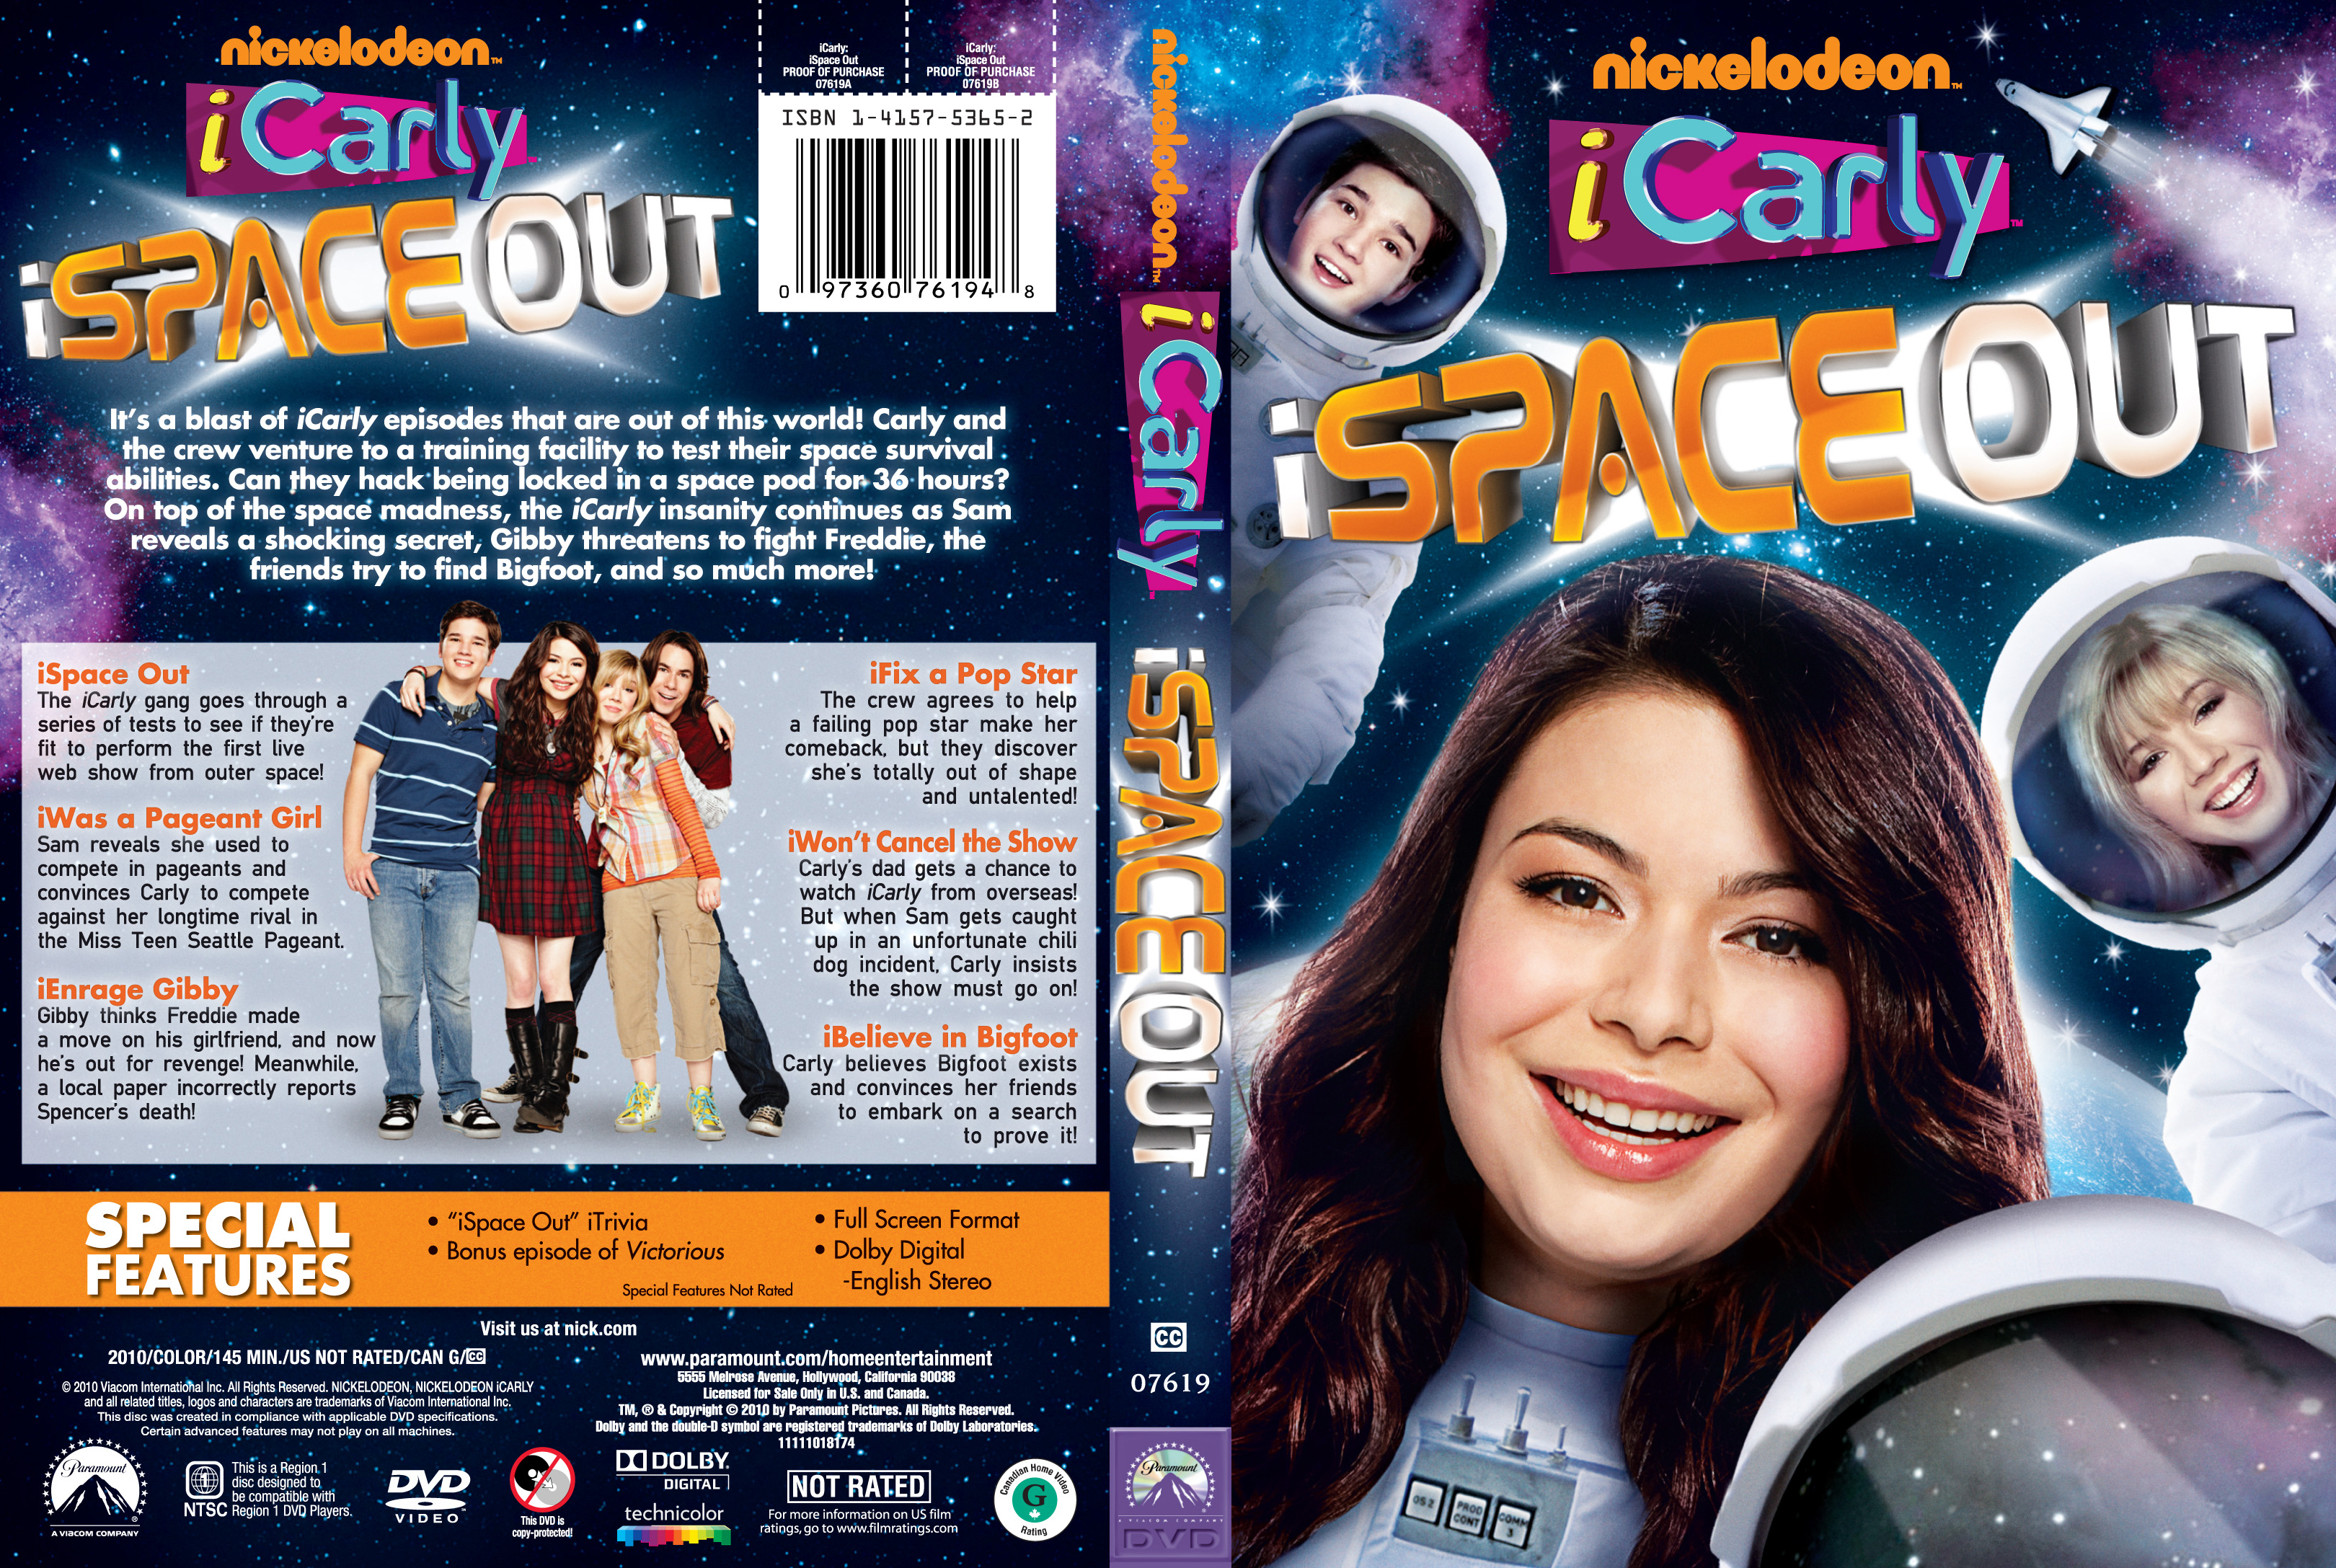 Icarly Ispace Out 12 Dvd Covers Cover Century Over 500 000 Album Art Covers For Free